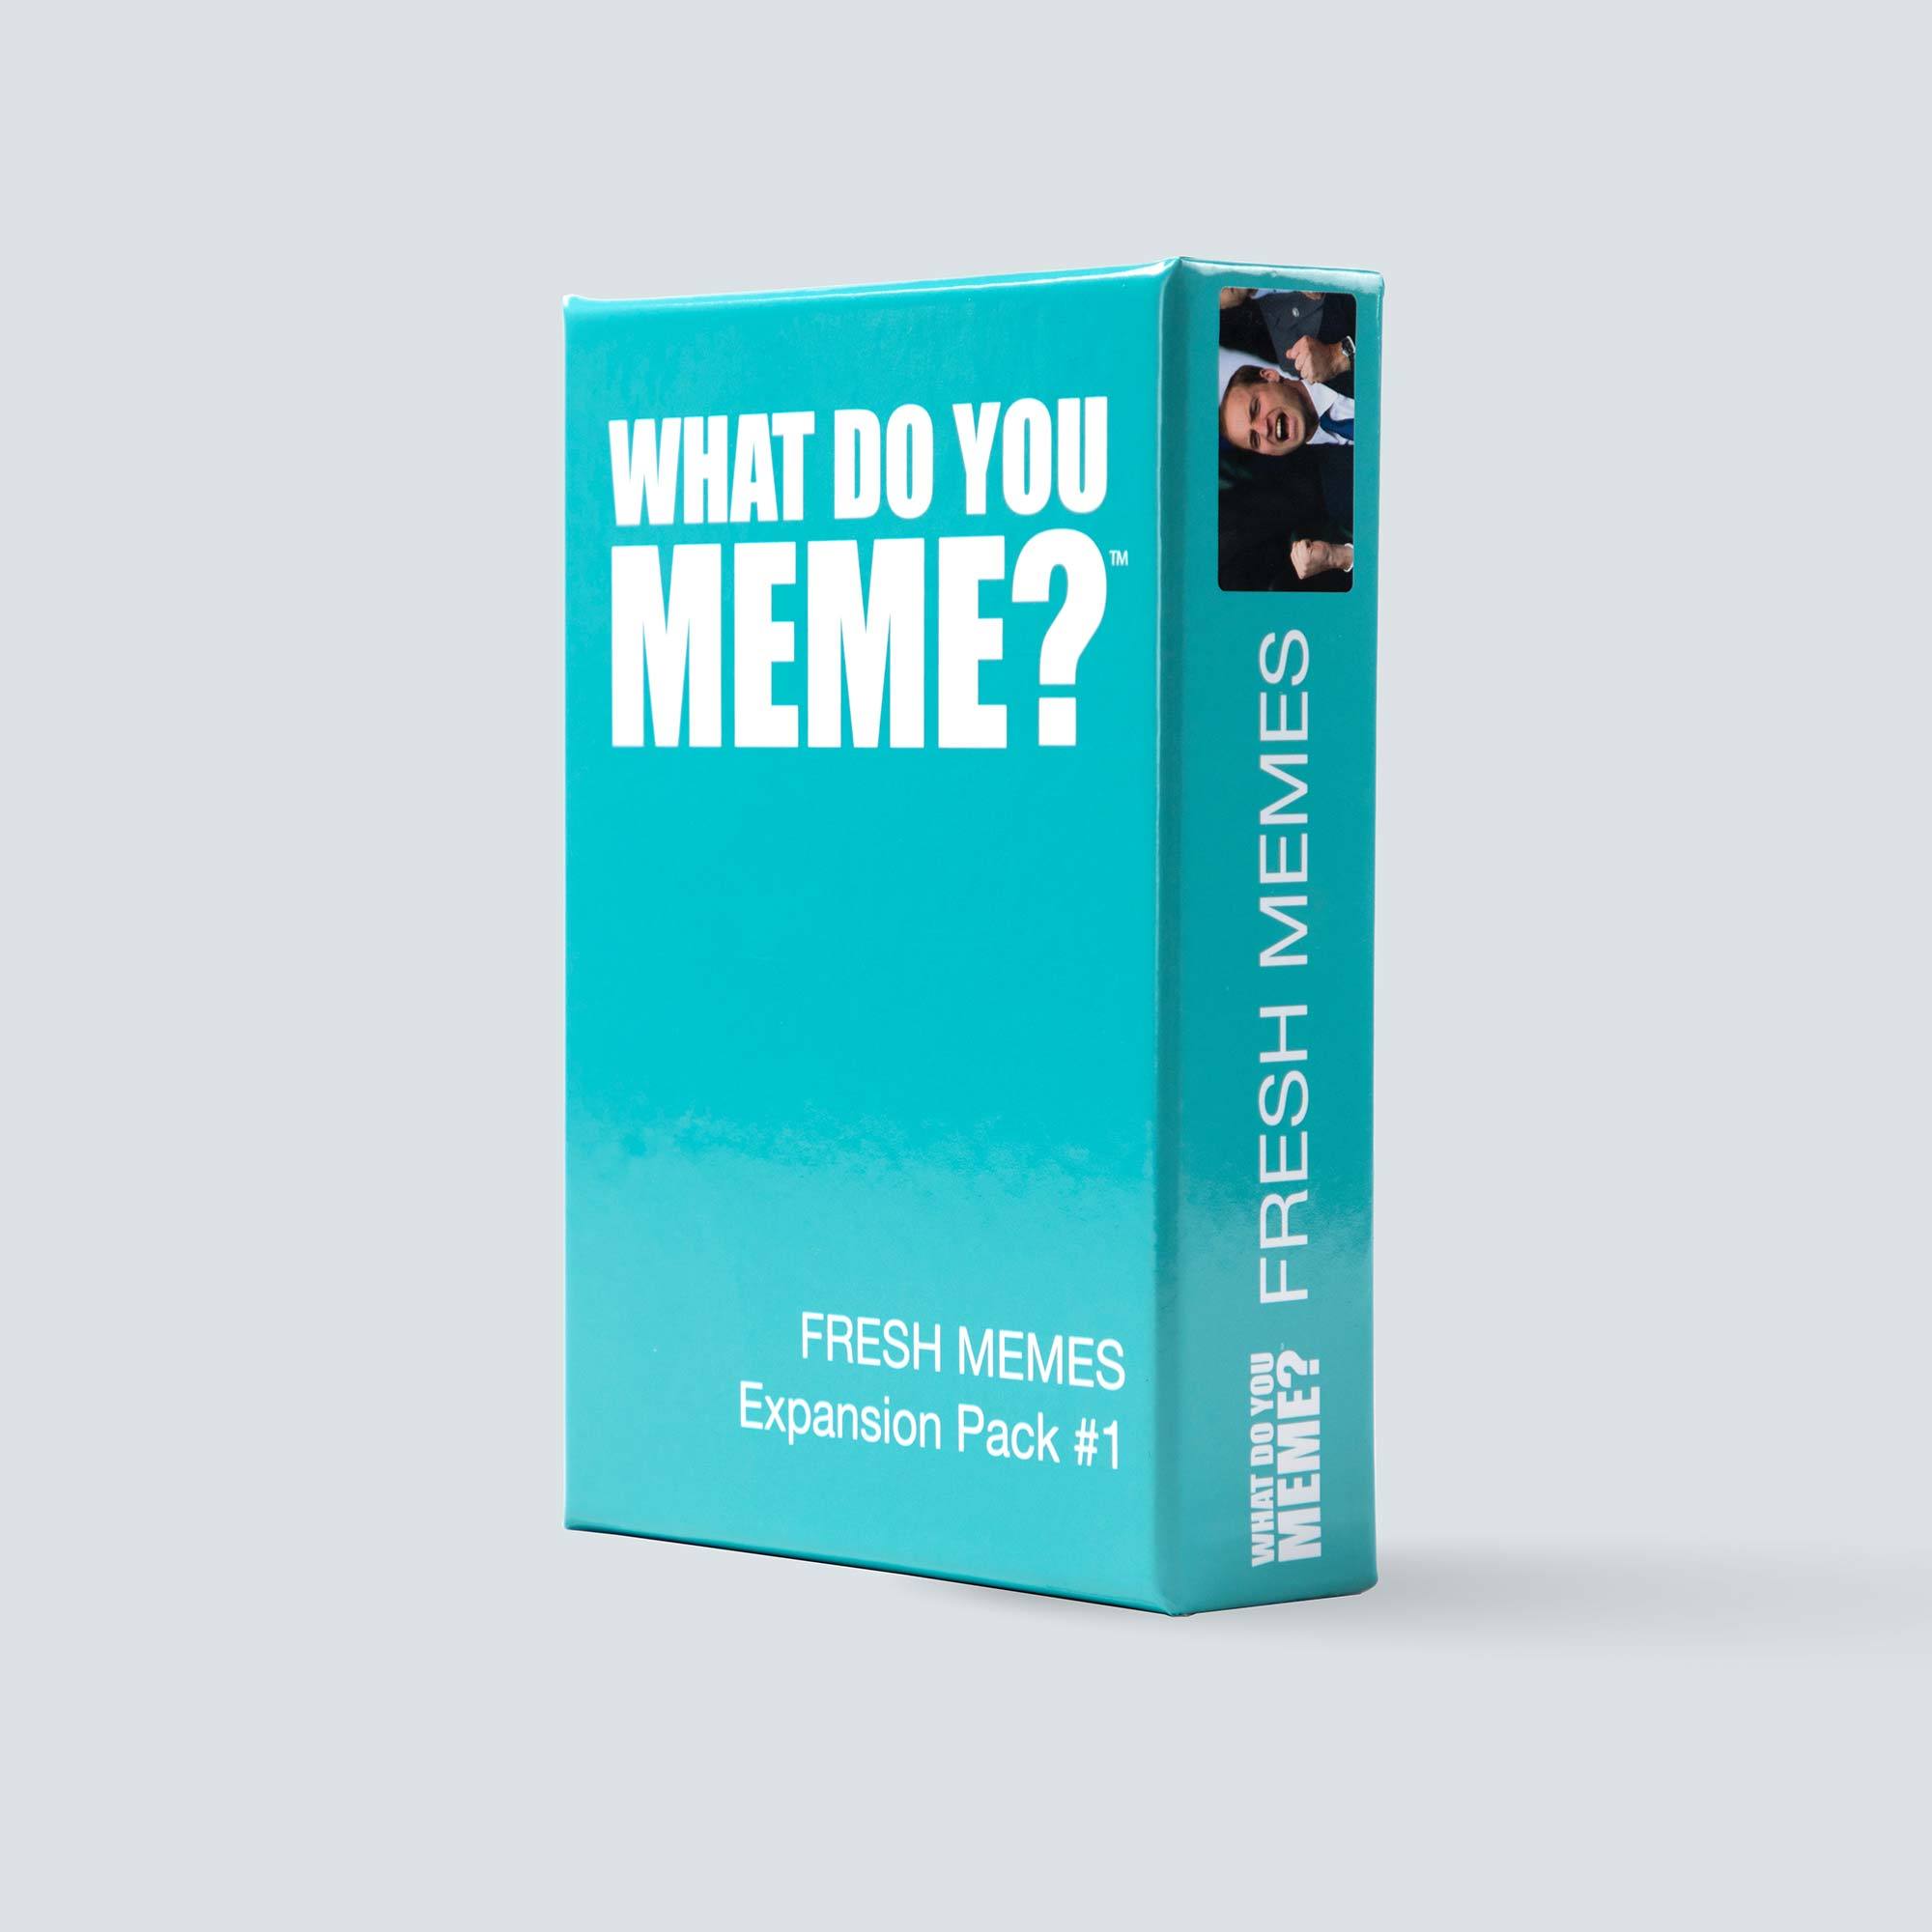 fresh-memes-expansion-pack-game-box-and-game-play-02-what-do-you-meme-by-relatable